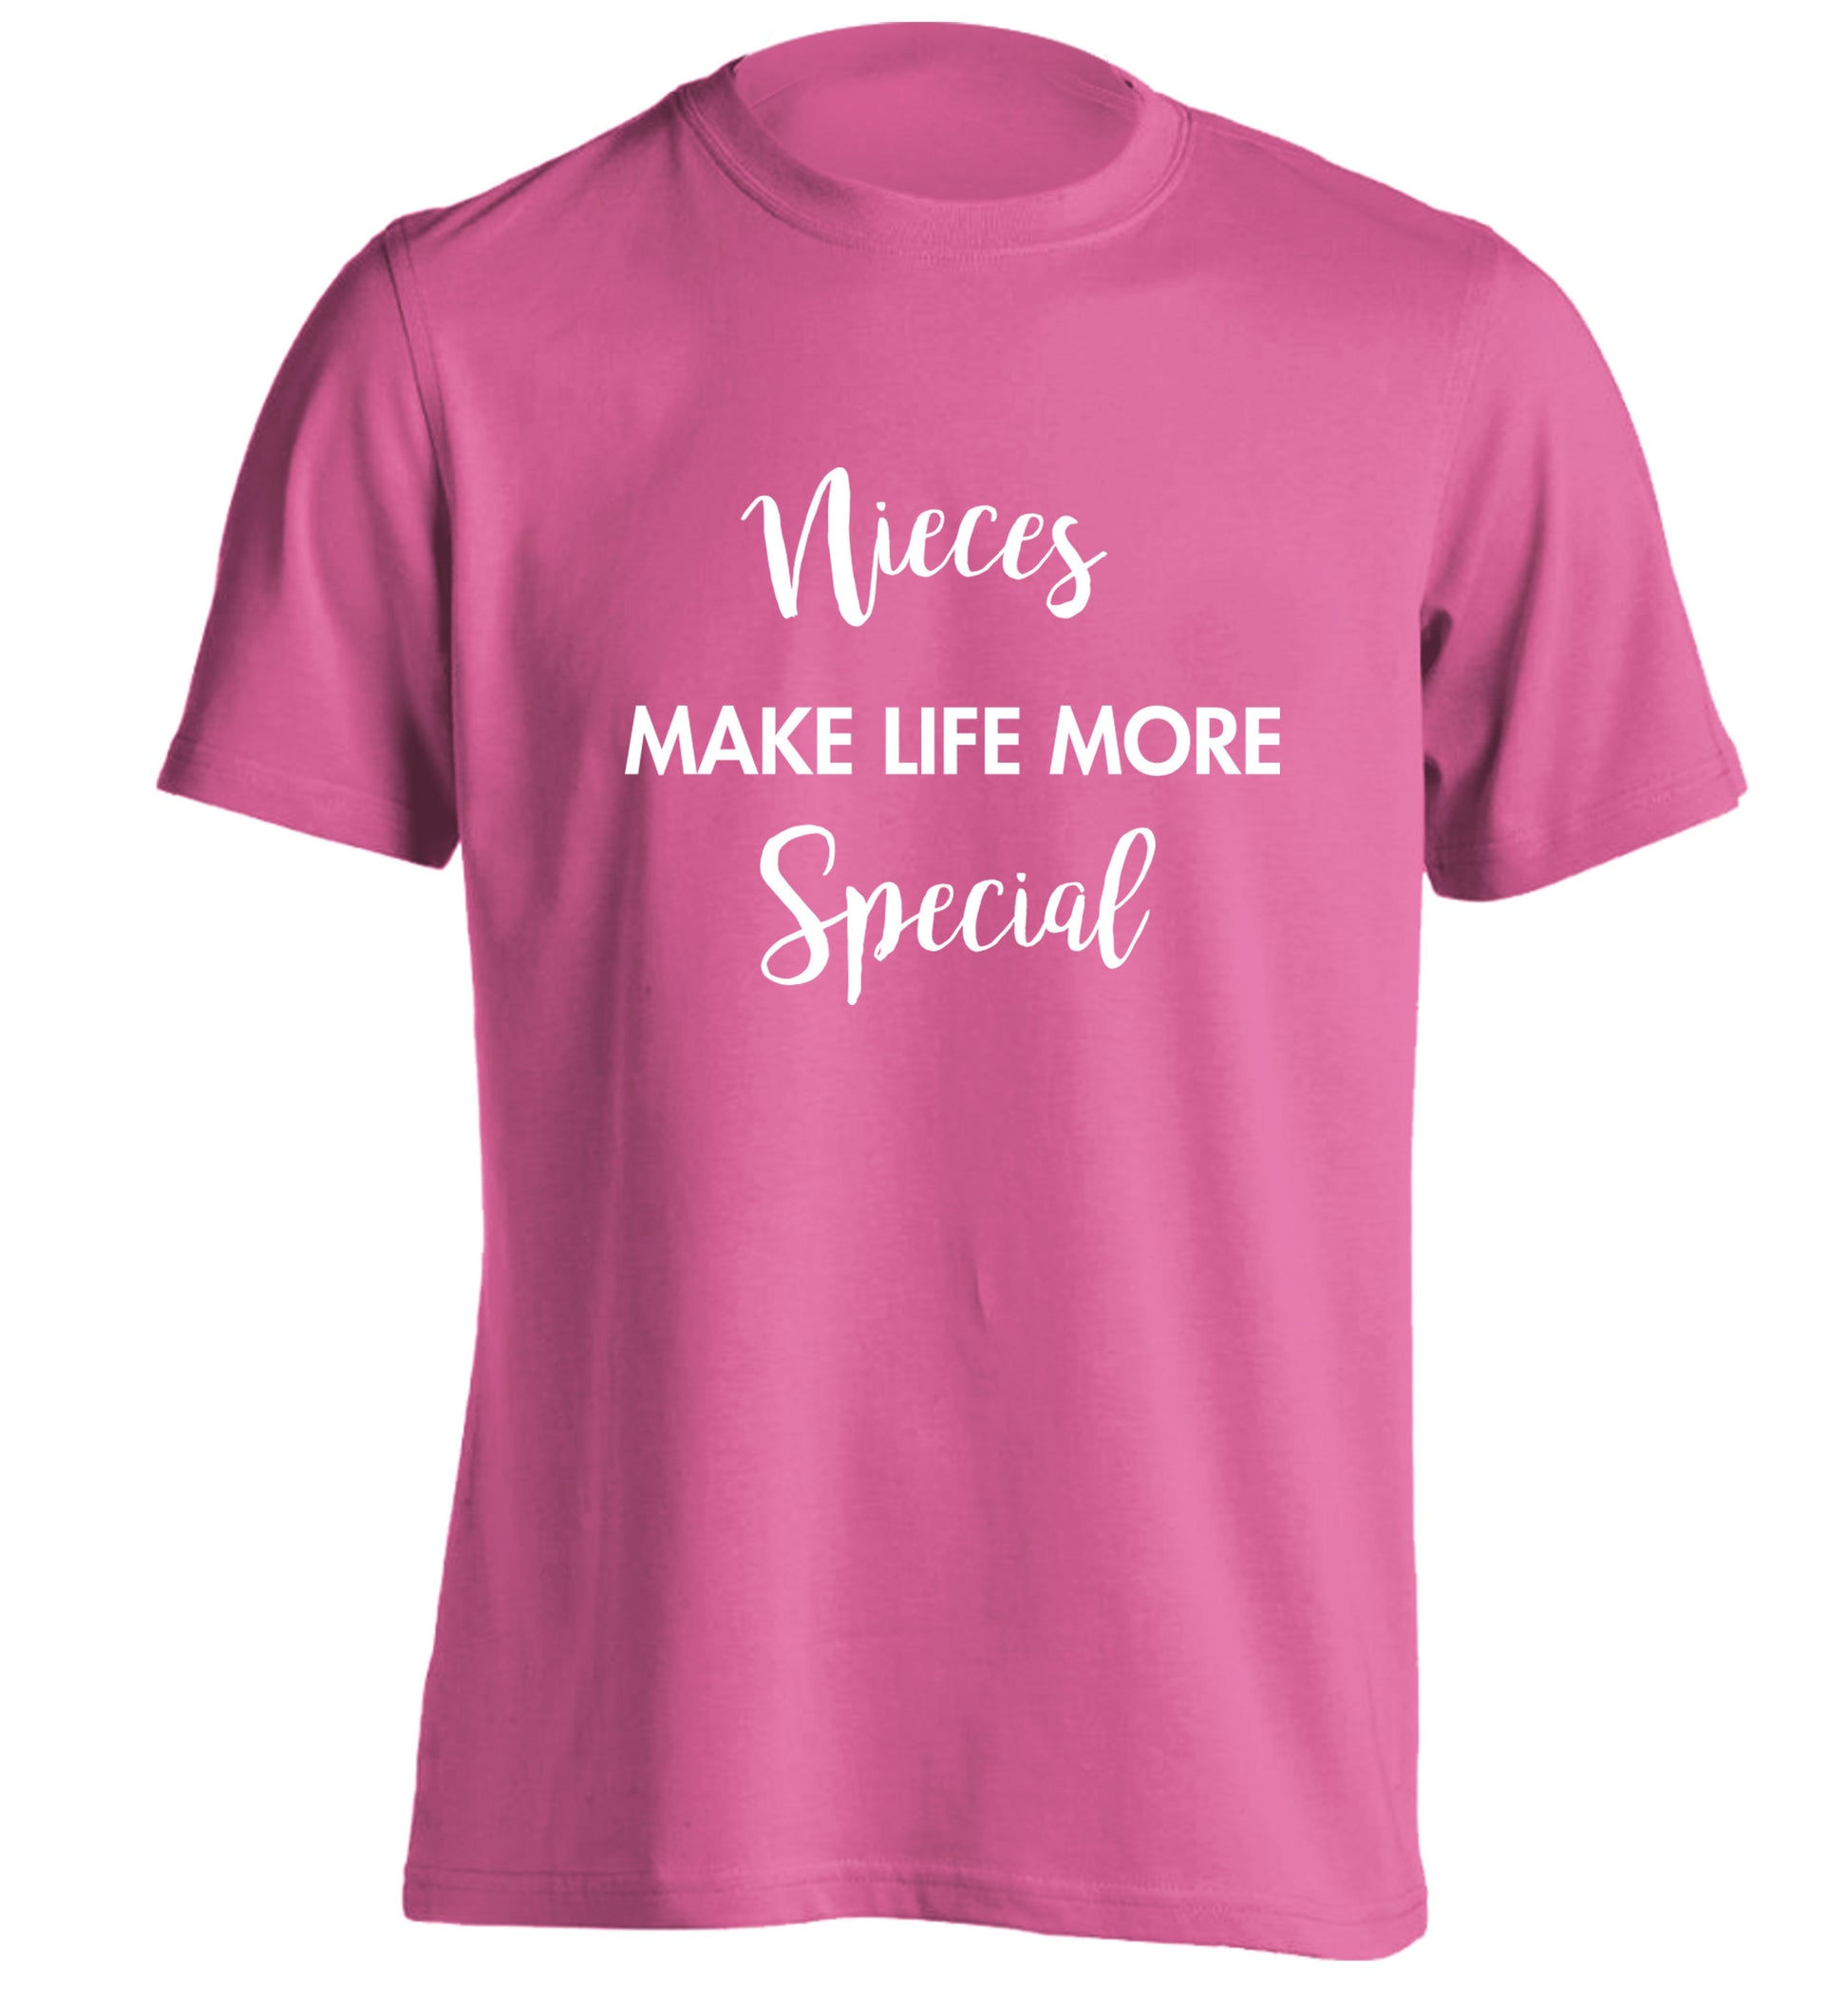 Nieces make life more special adults unisex pink Tshirt 2XL